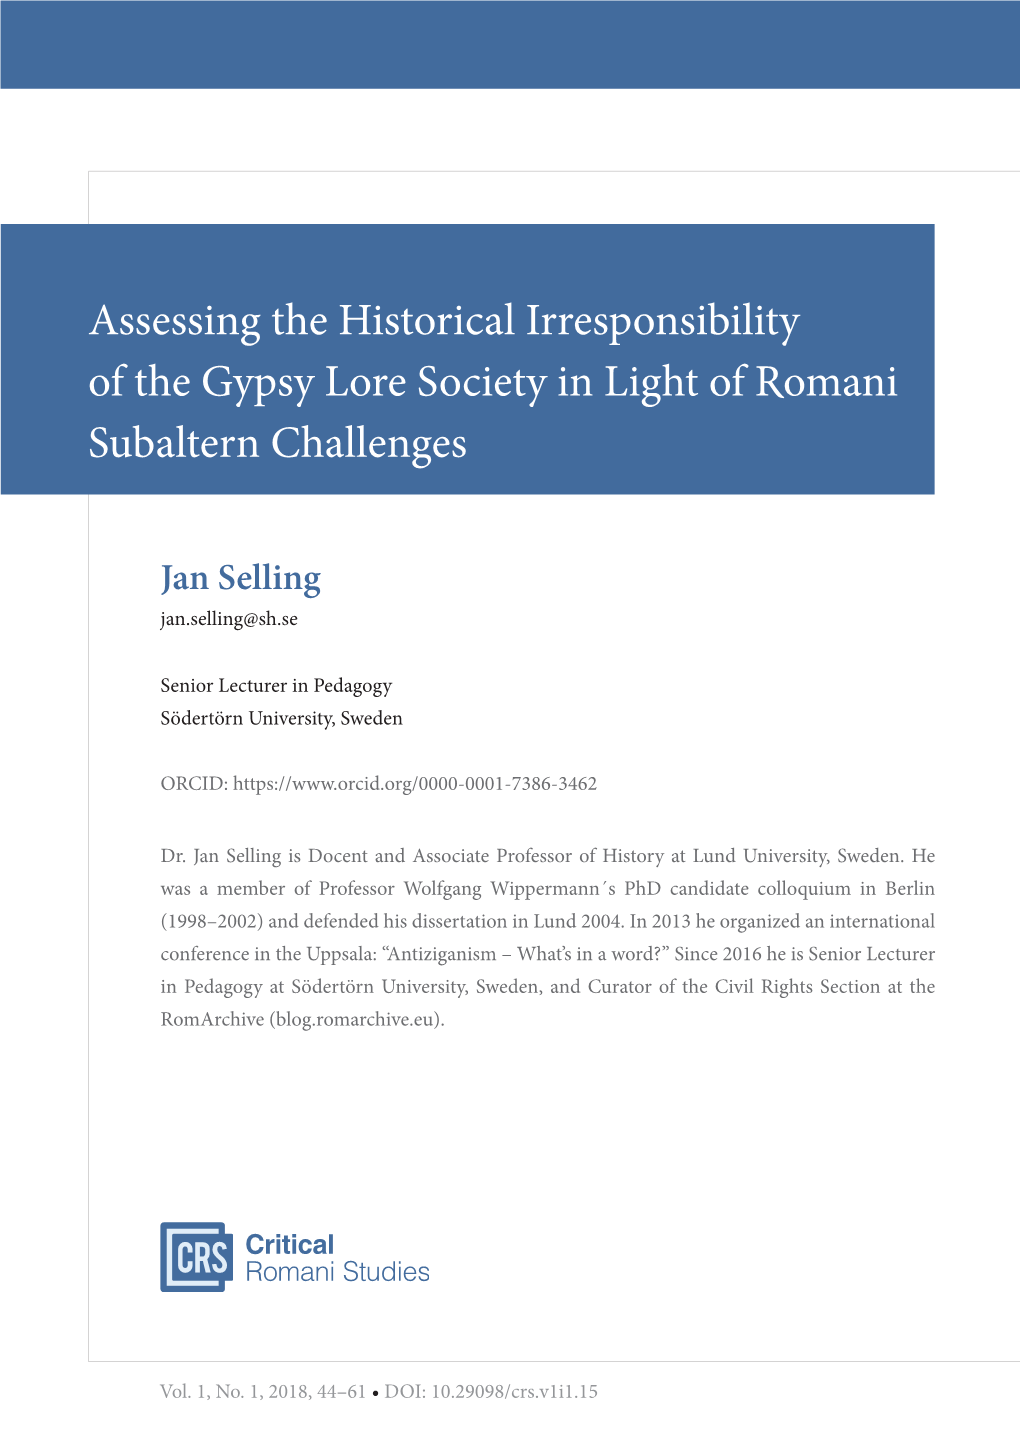 Assessing the Historical Irresponsibility of the Gypsy Lore Society in Light of Romani Subaltern Challenges